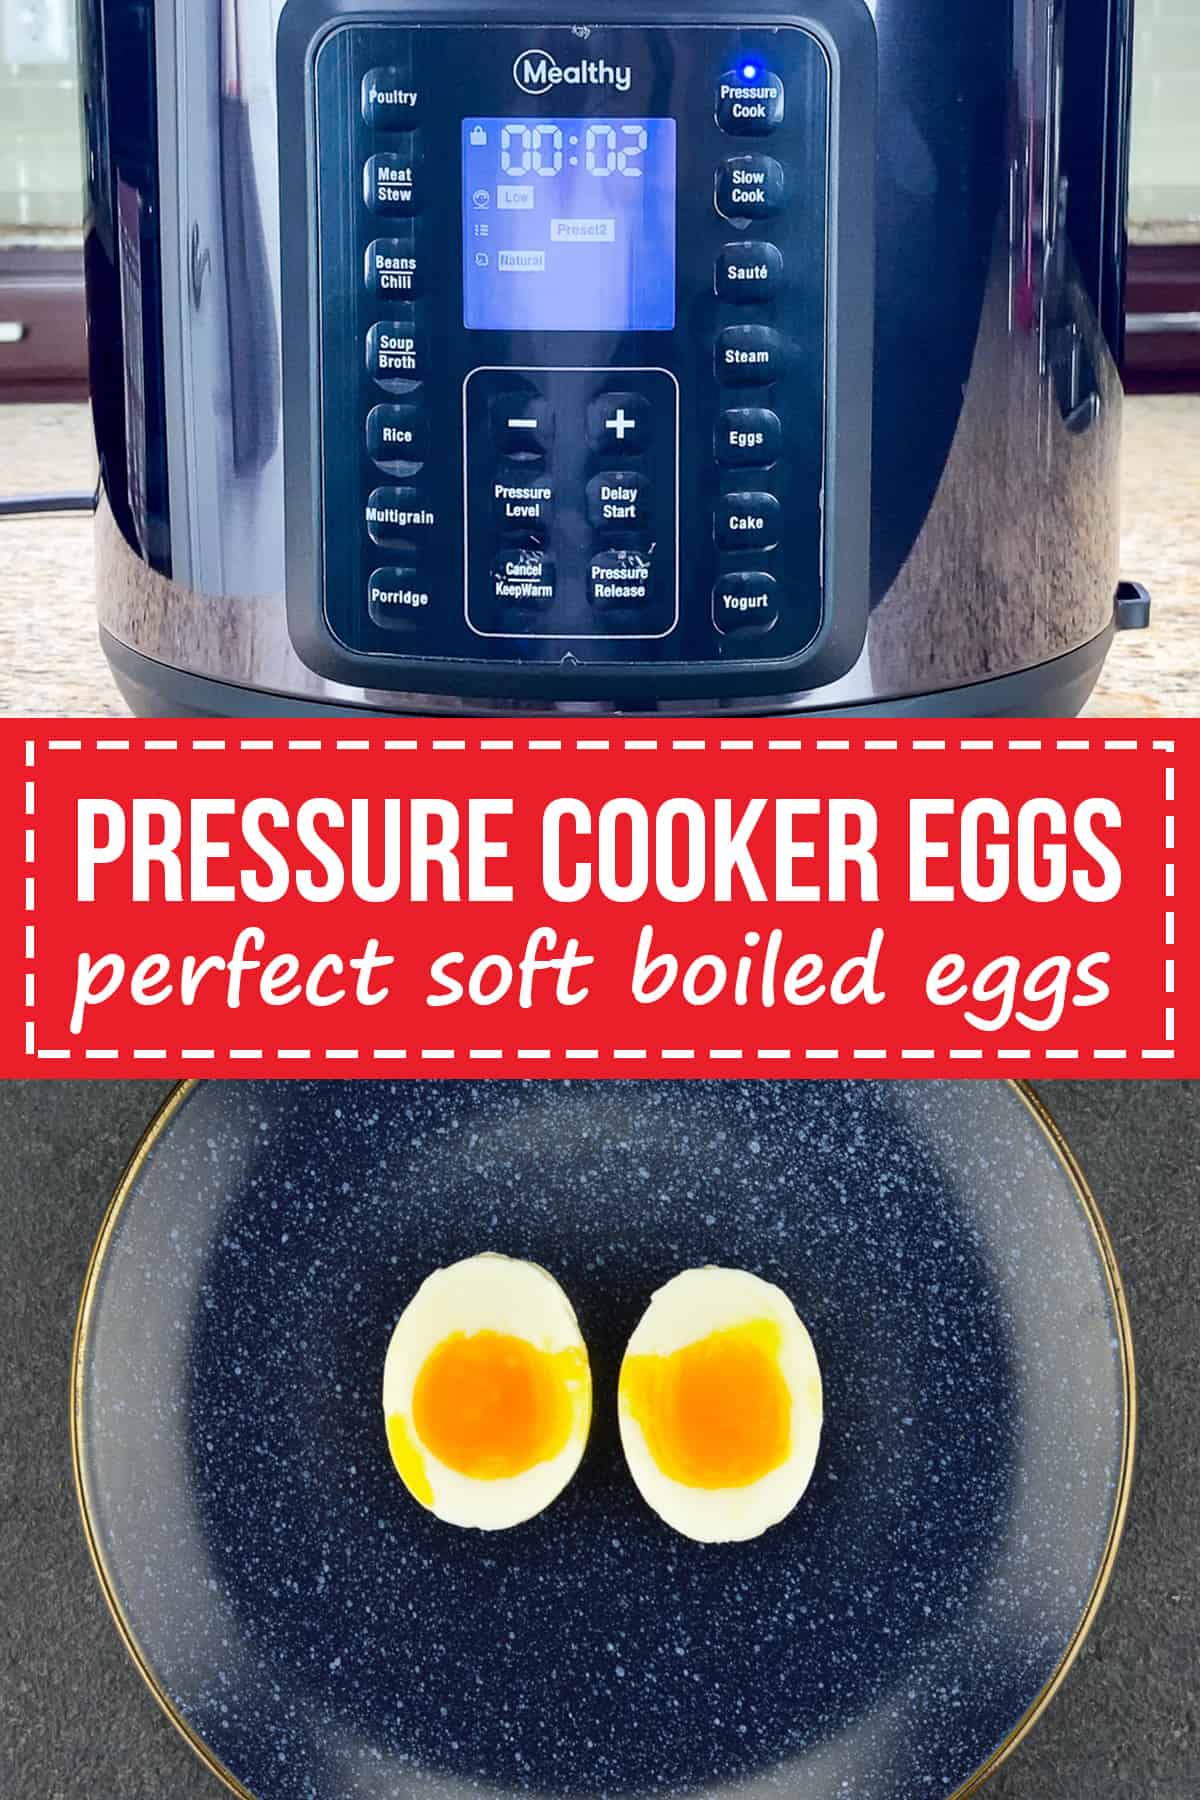 a collage of 2 photos stacked vertically - the top one showing mealthy pressure cooker, and the bottom one showing a plate with one soft boiled egg, cut open vertically